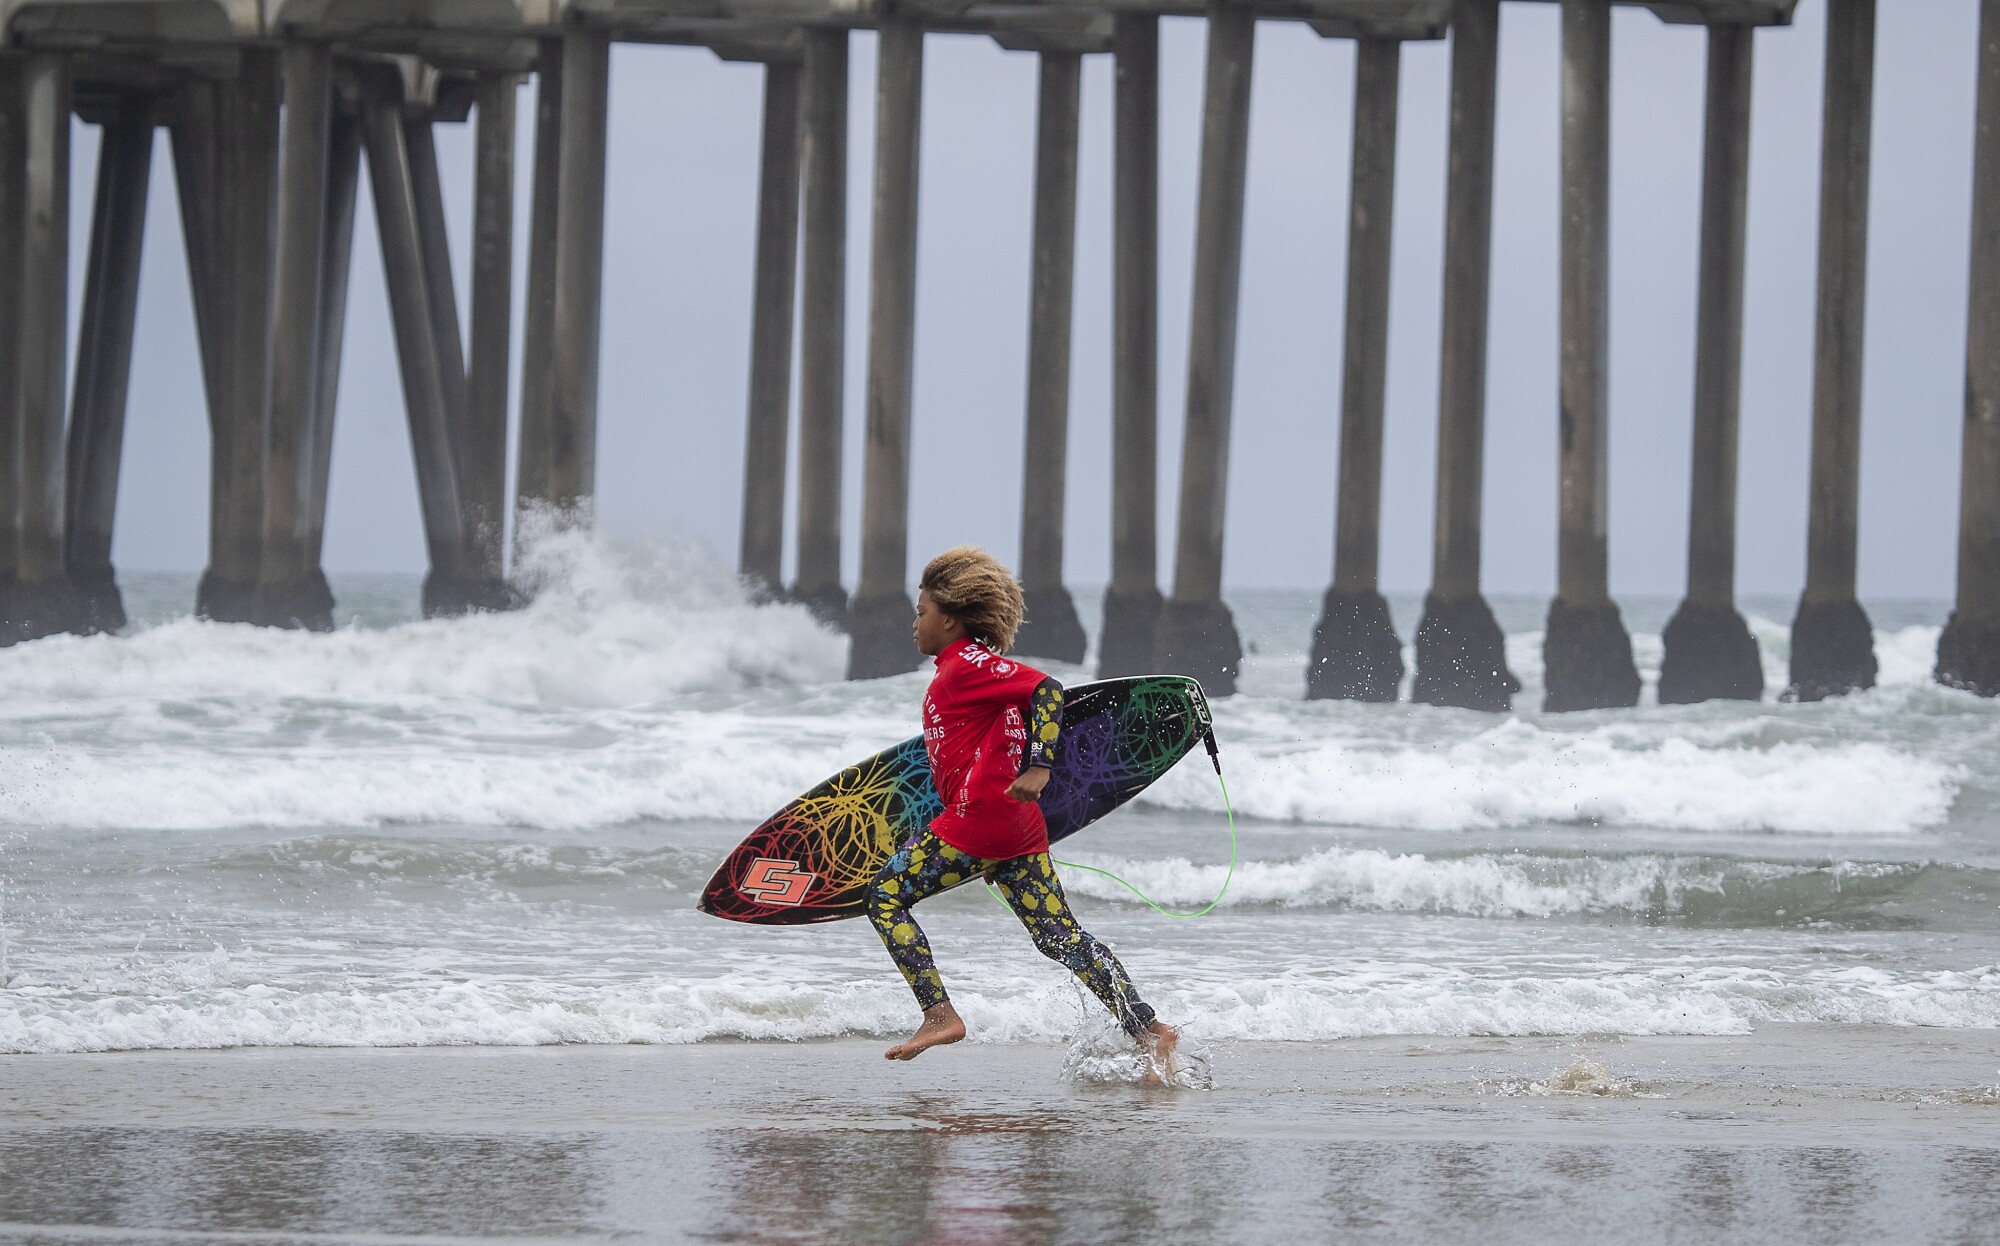 A child with a surfboard runs into the ocean.